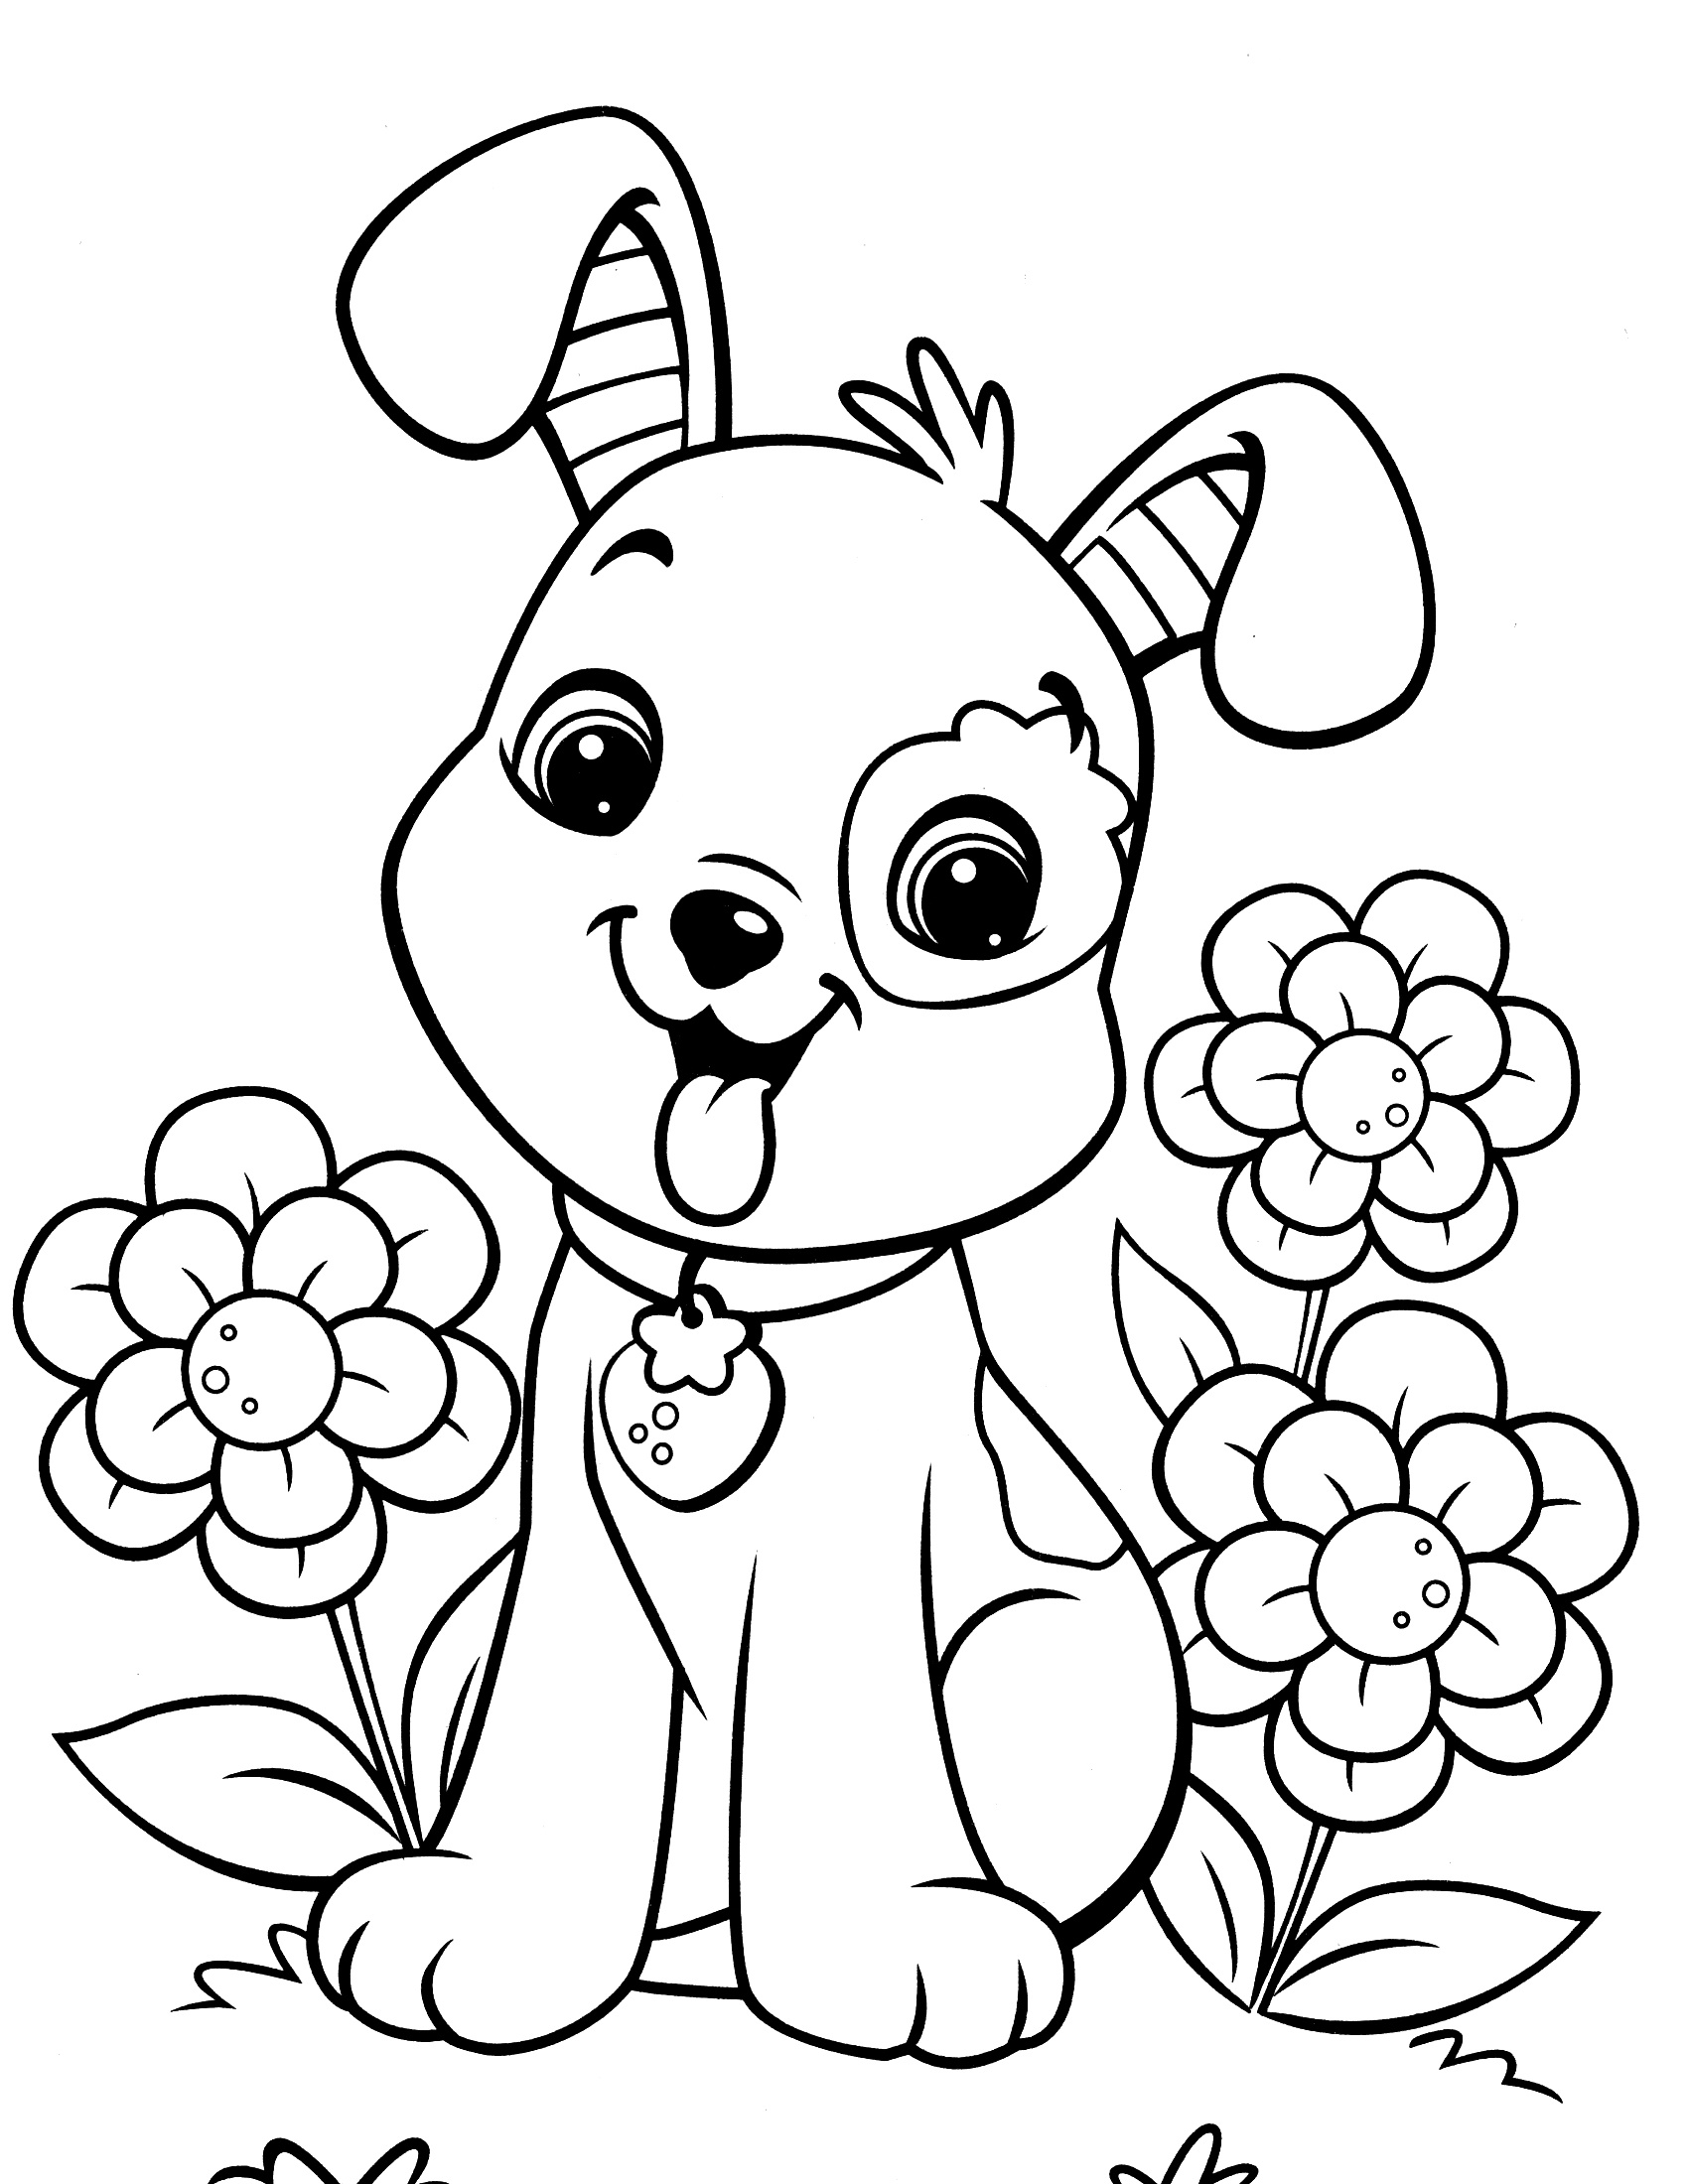 Dog Coloring Pages For Girls